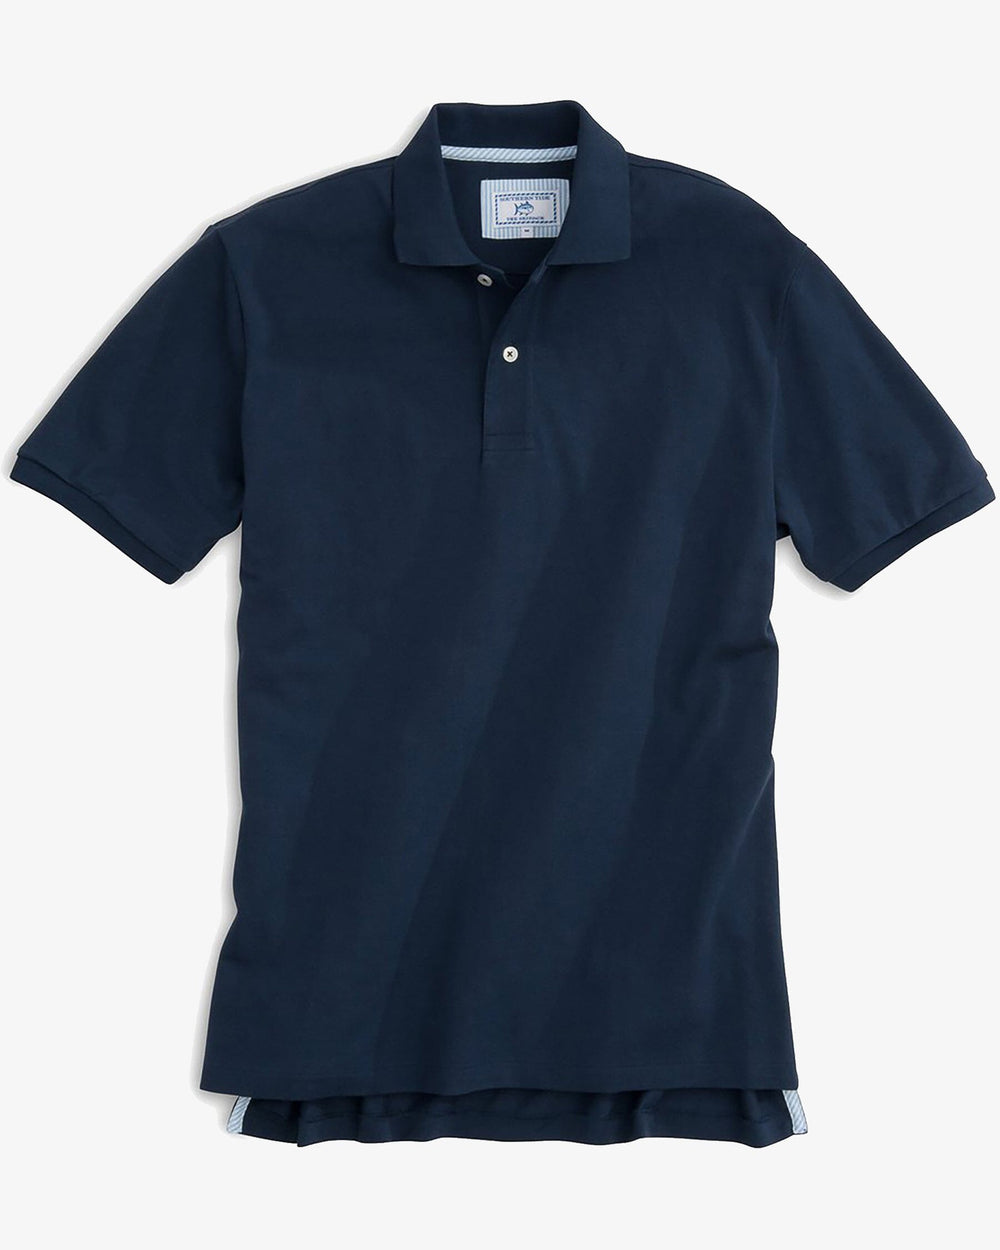 The front view of the Men's Orange Skipjack Gameday Colors Polo Shirt by Southern Tide - Navy